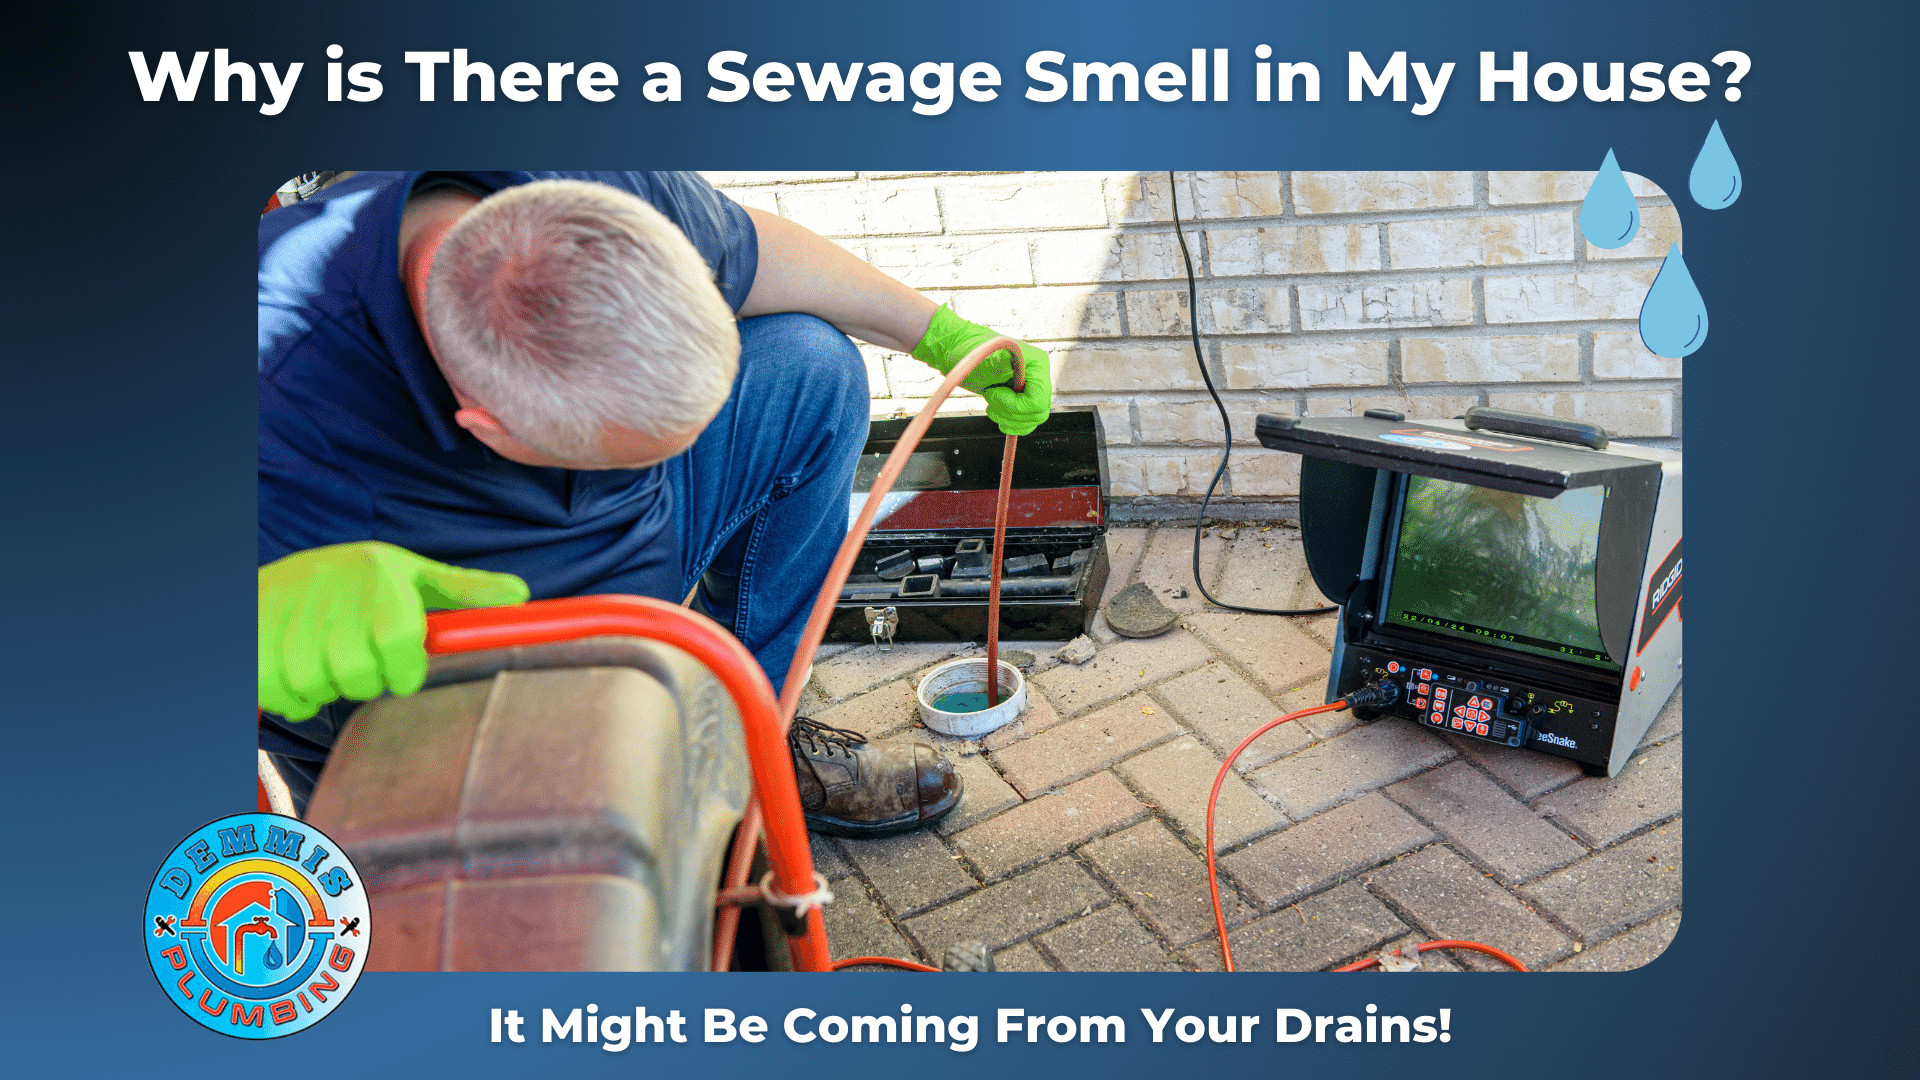 Why is There a Sewage Smell in My House?